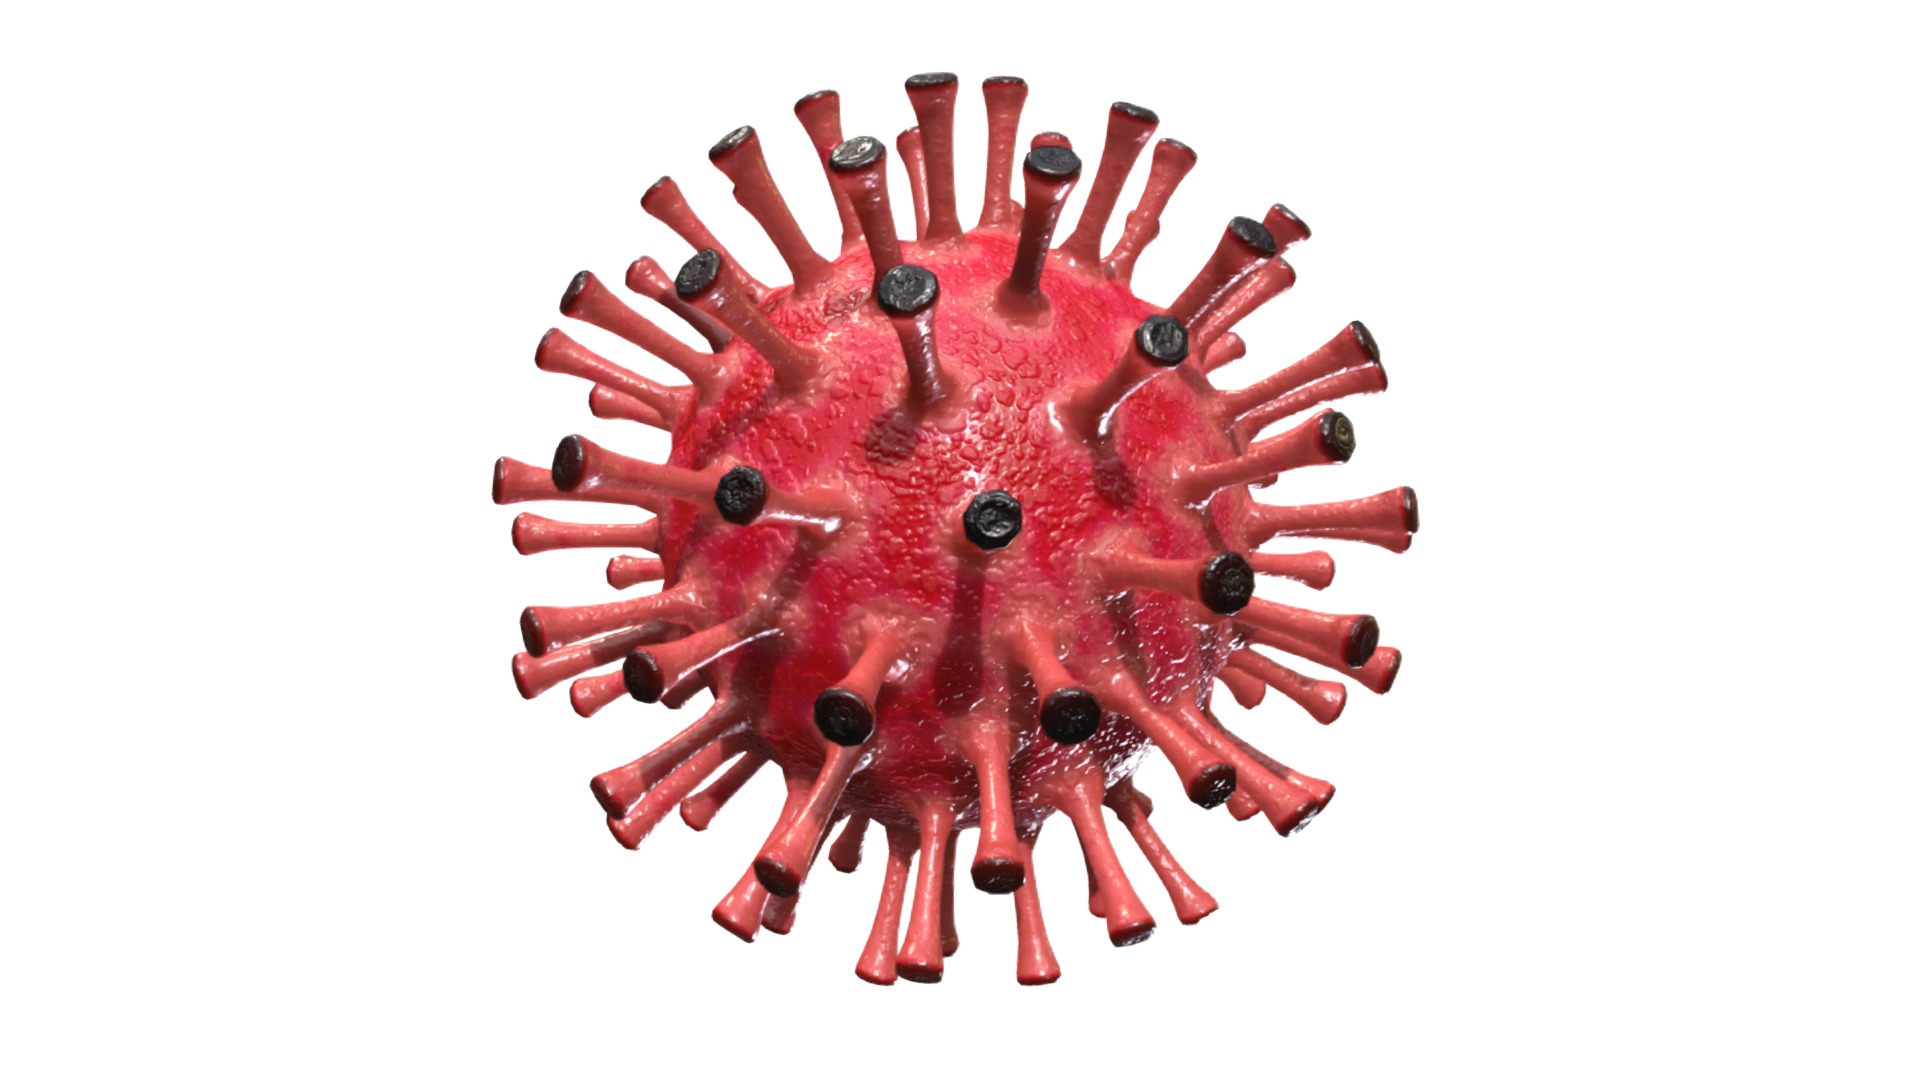 3D model Corona Virus Covid 19 - This is a 3D model of the Corona Virus Covid 19. The 3D model is about a red and black object.